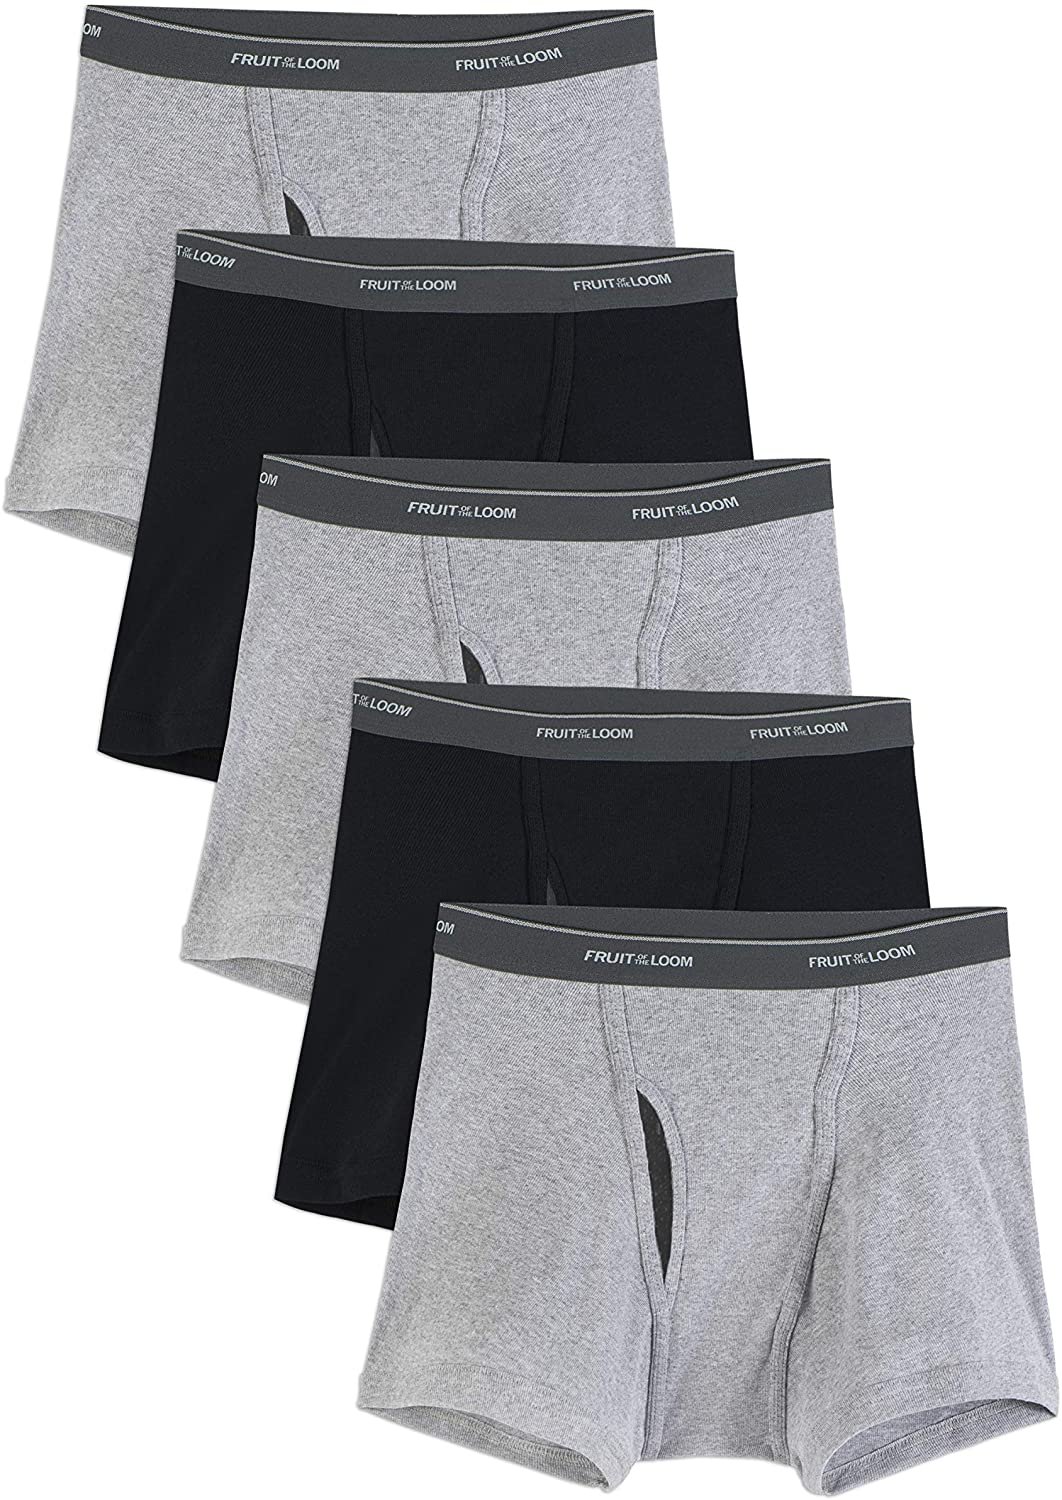 Fruit of the Loom Men's CoolZone Boxer Briefs, Assorted Colors